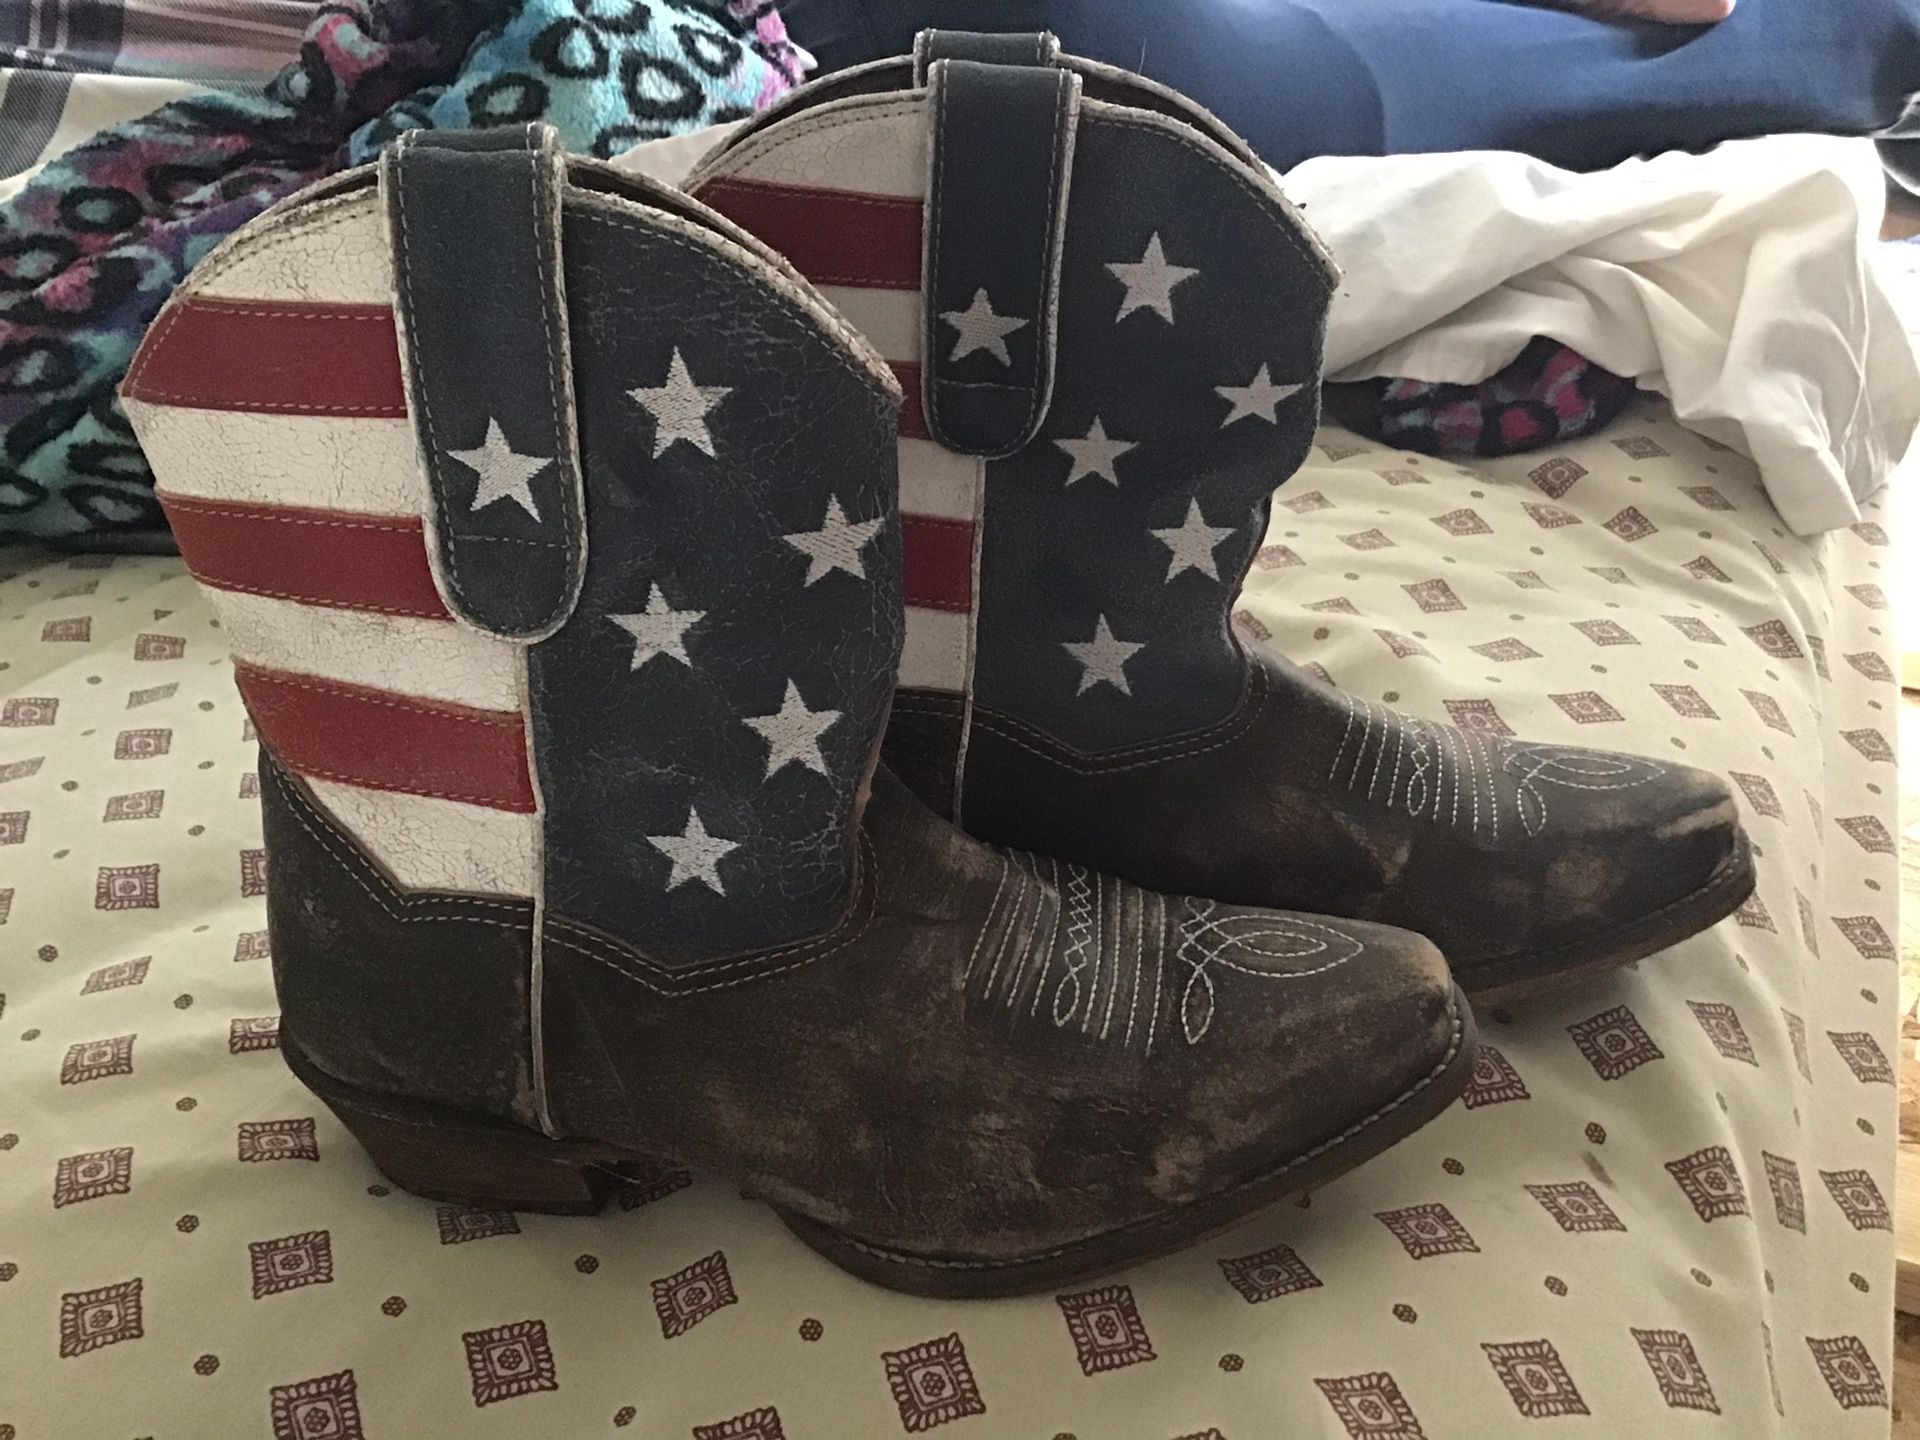 Original boots. Excellent condition! Barley use.